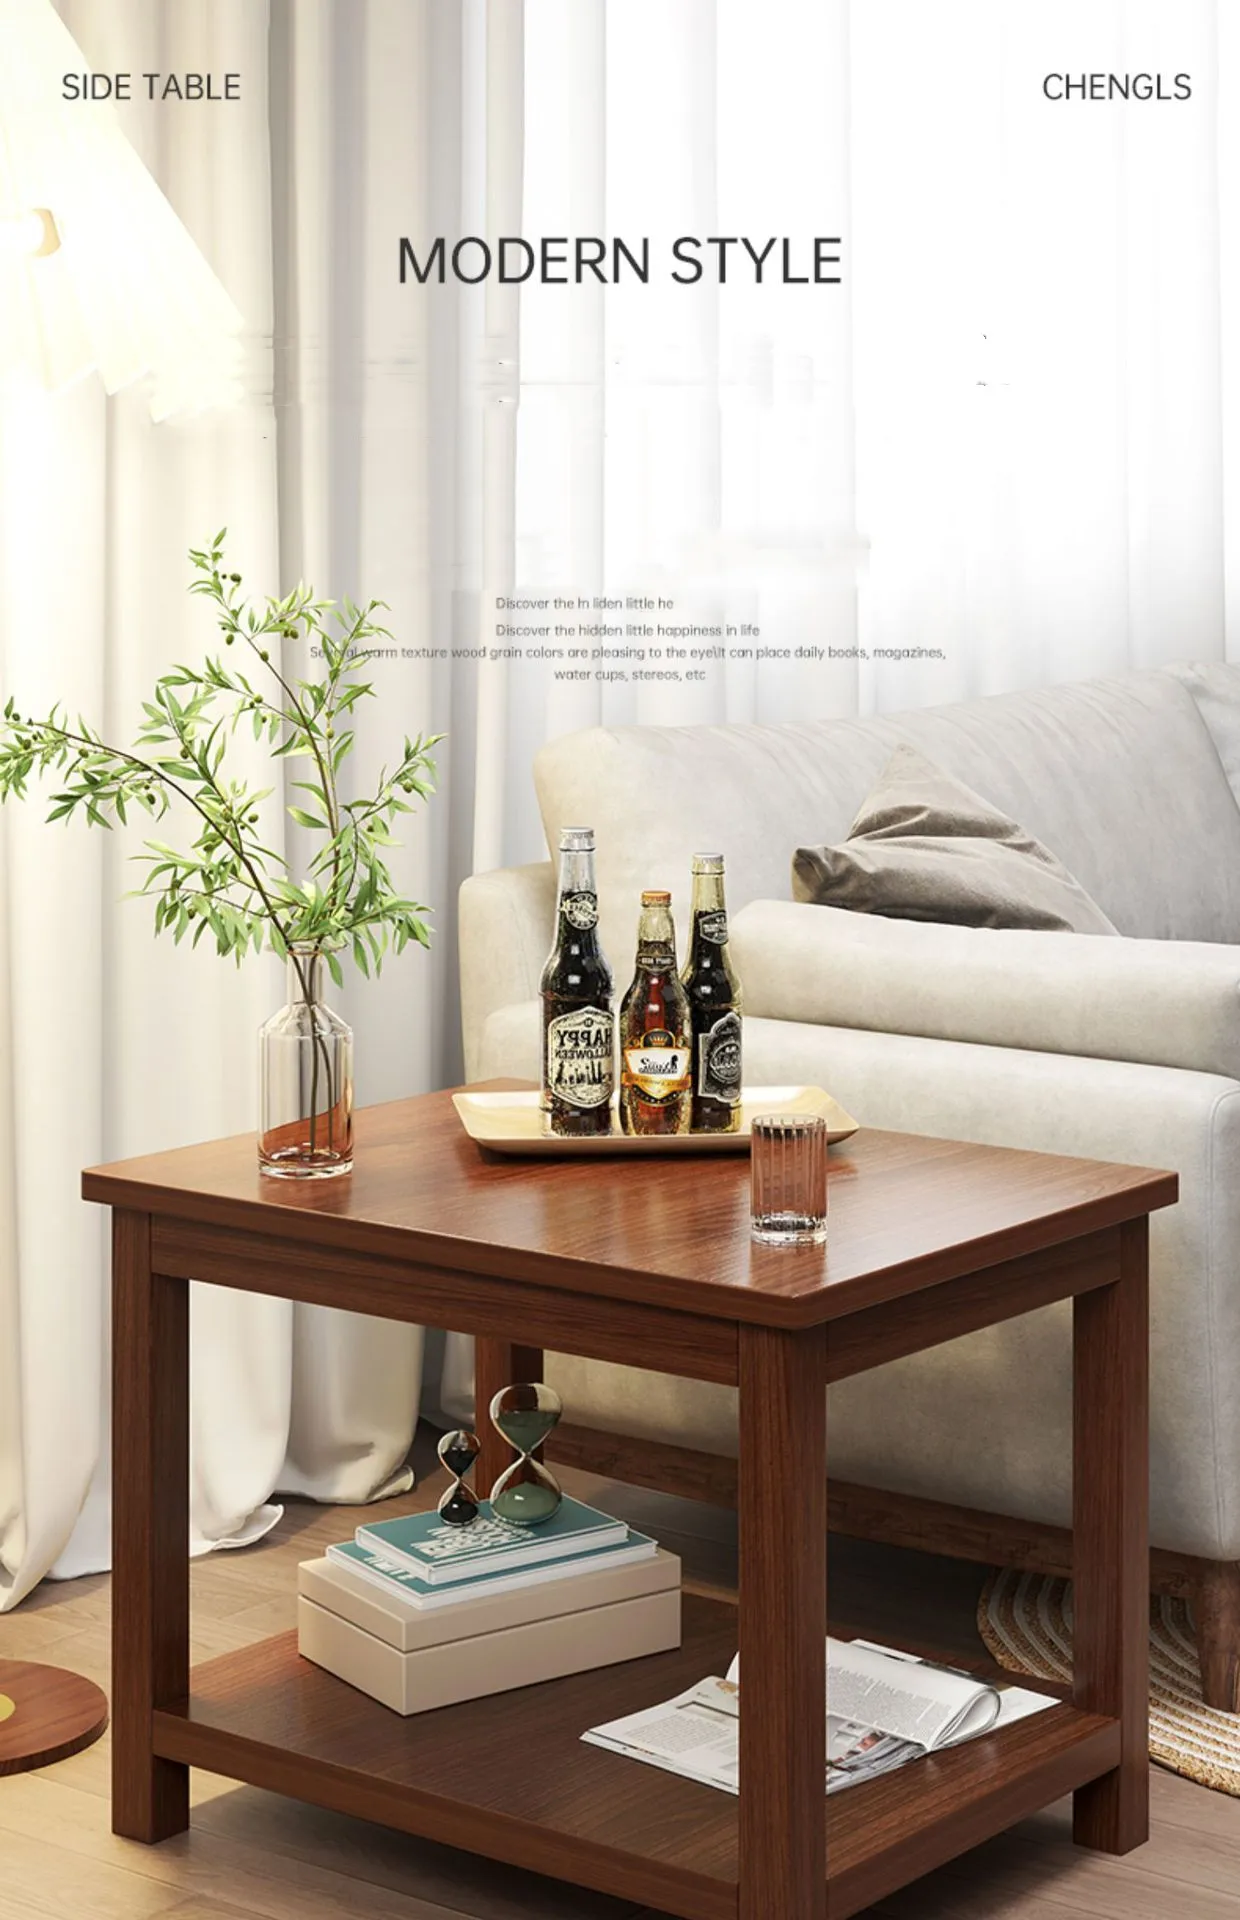 Wholesale New design wooden bedside table Rustic Solid Wood Coffee Table Tea Table home furniture living room office desk